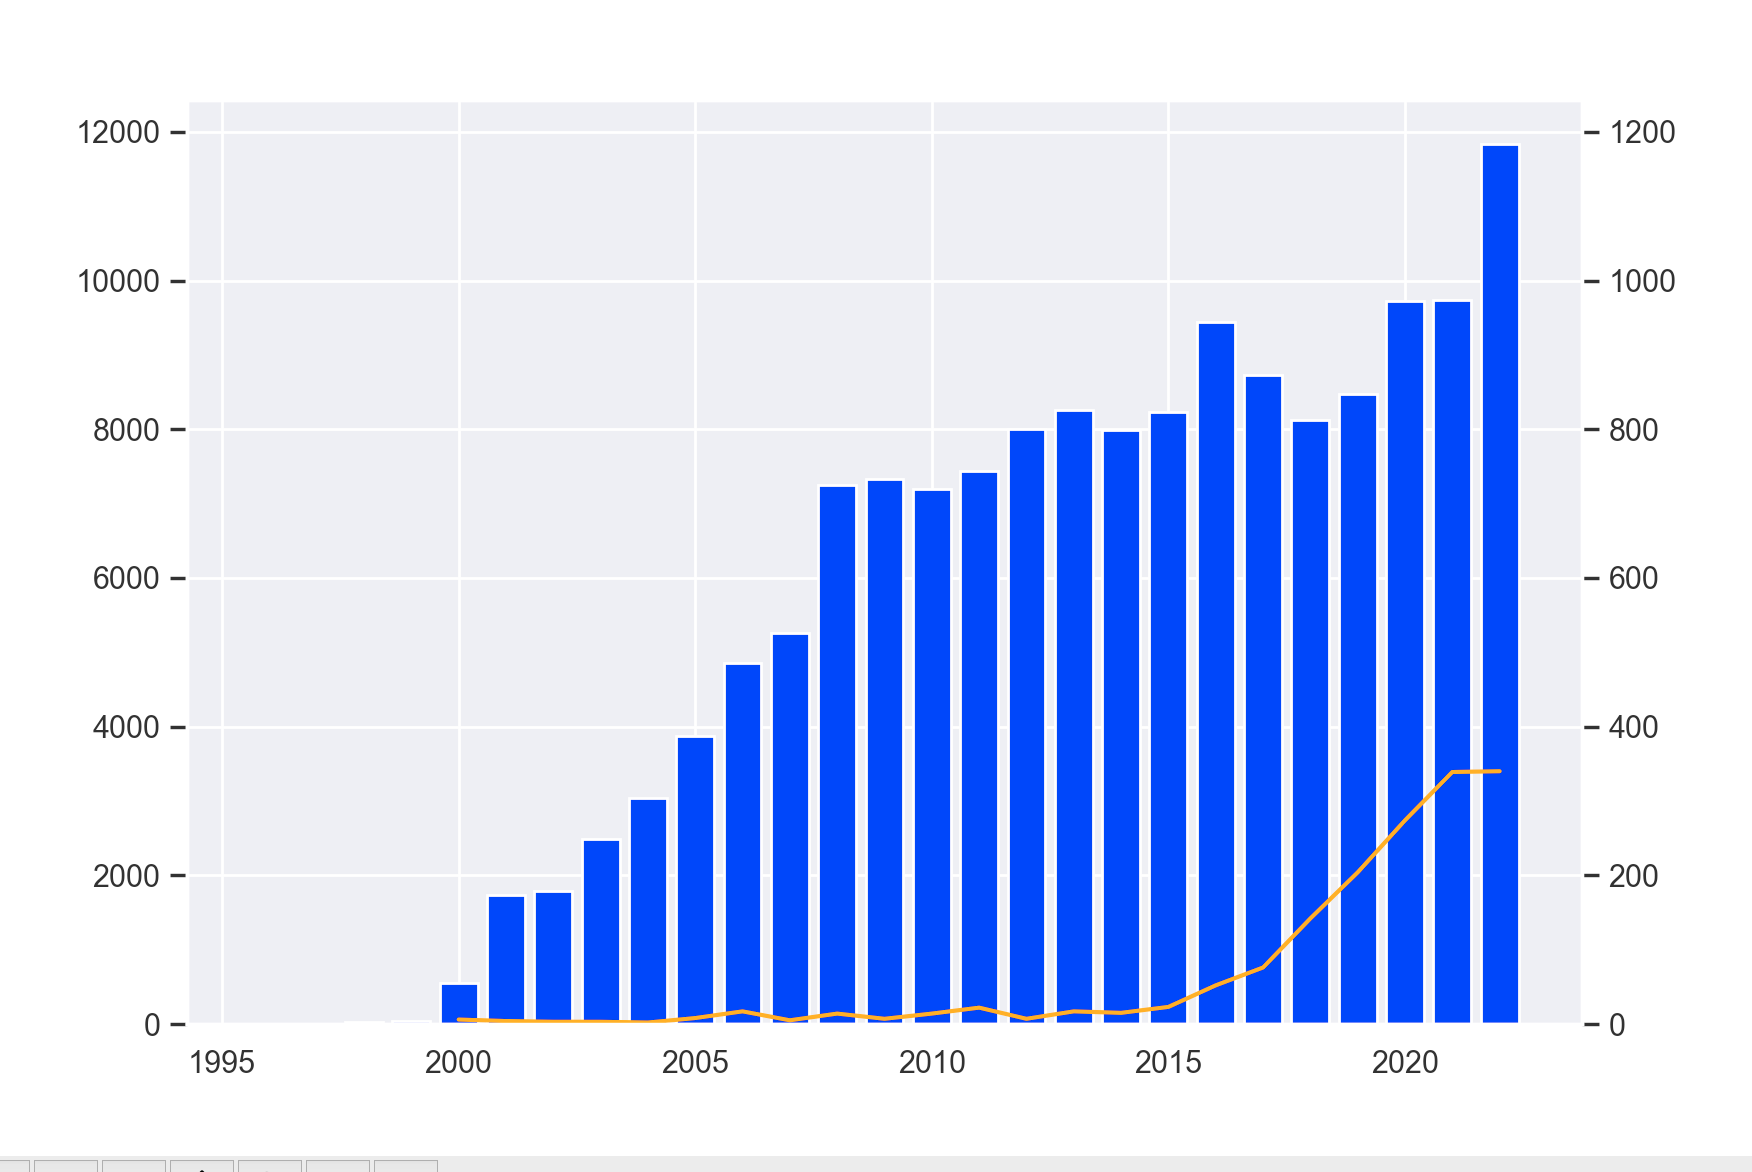 The graph shows how many finance papers were published in the given year on the website ssrn.com, and how many of them were ML-related